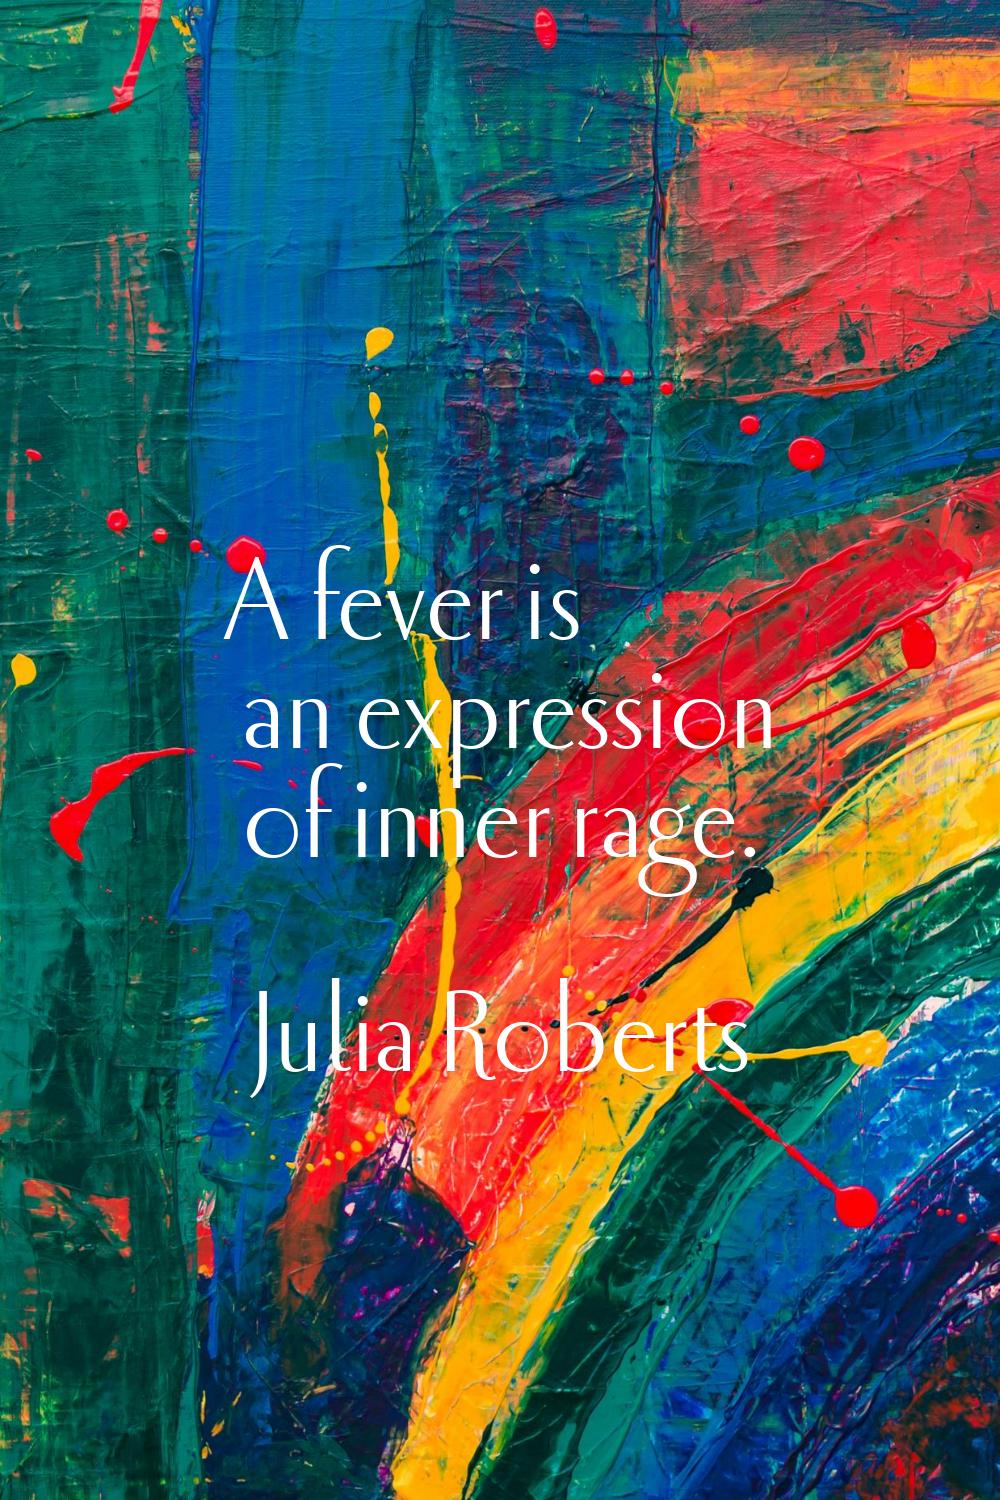 A fever is an expression of inner rage.